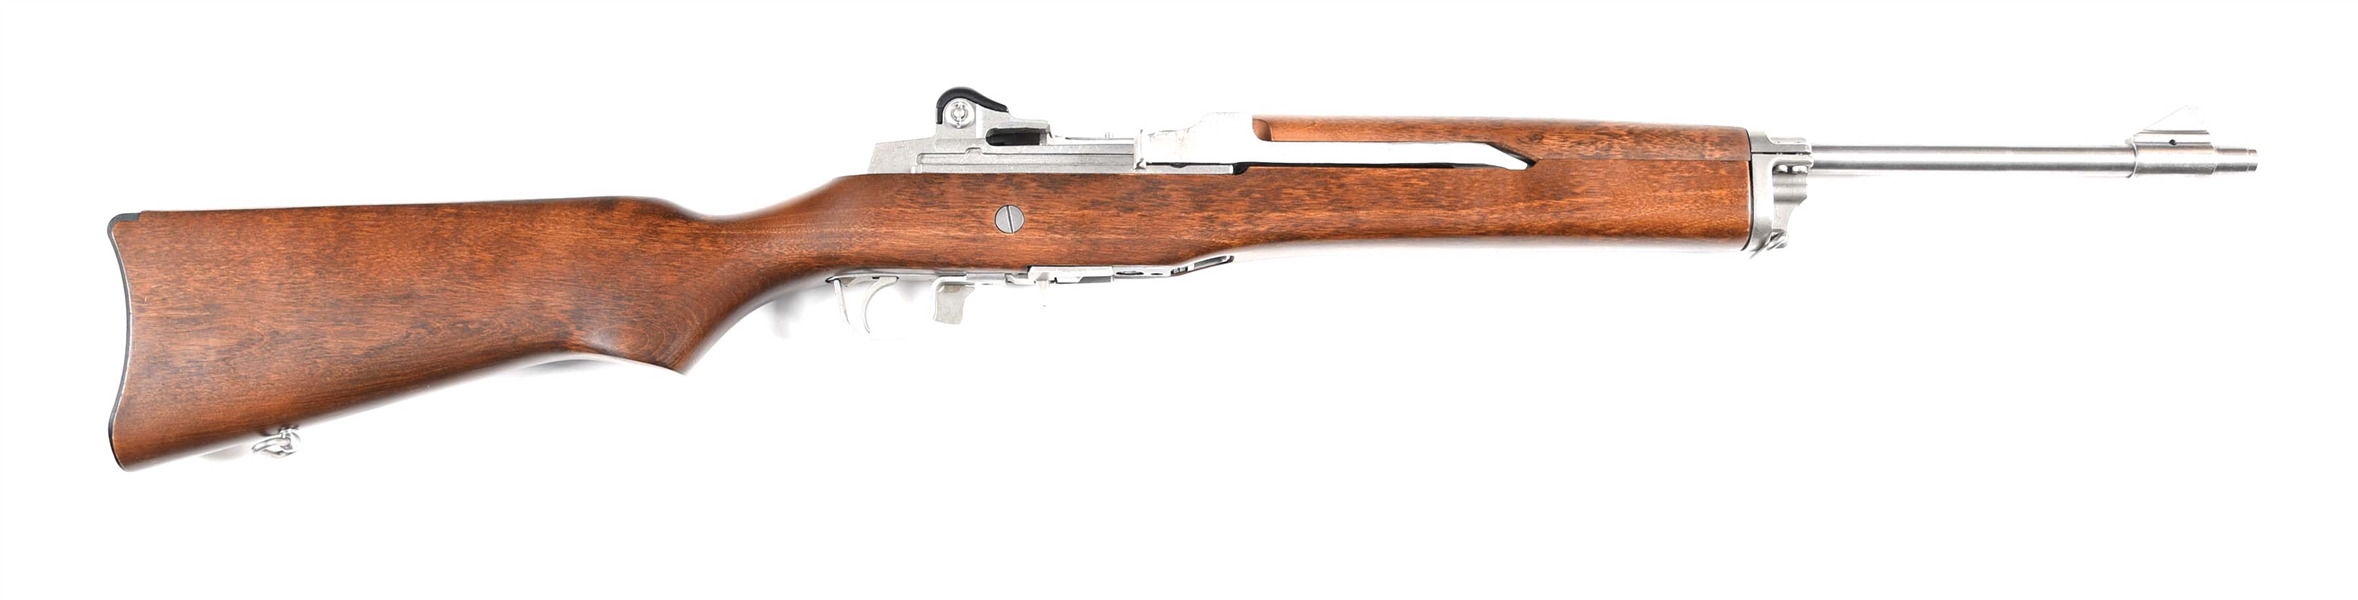 (M) STAINLESS RUGER MINI-14 SEMI AUTOMATIC RIFLE (1981).